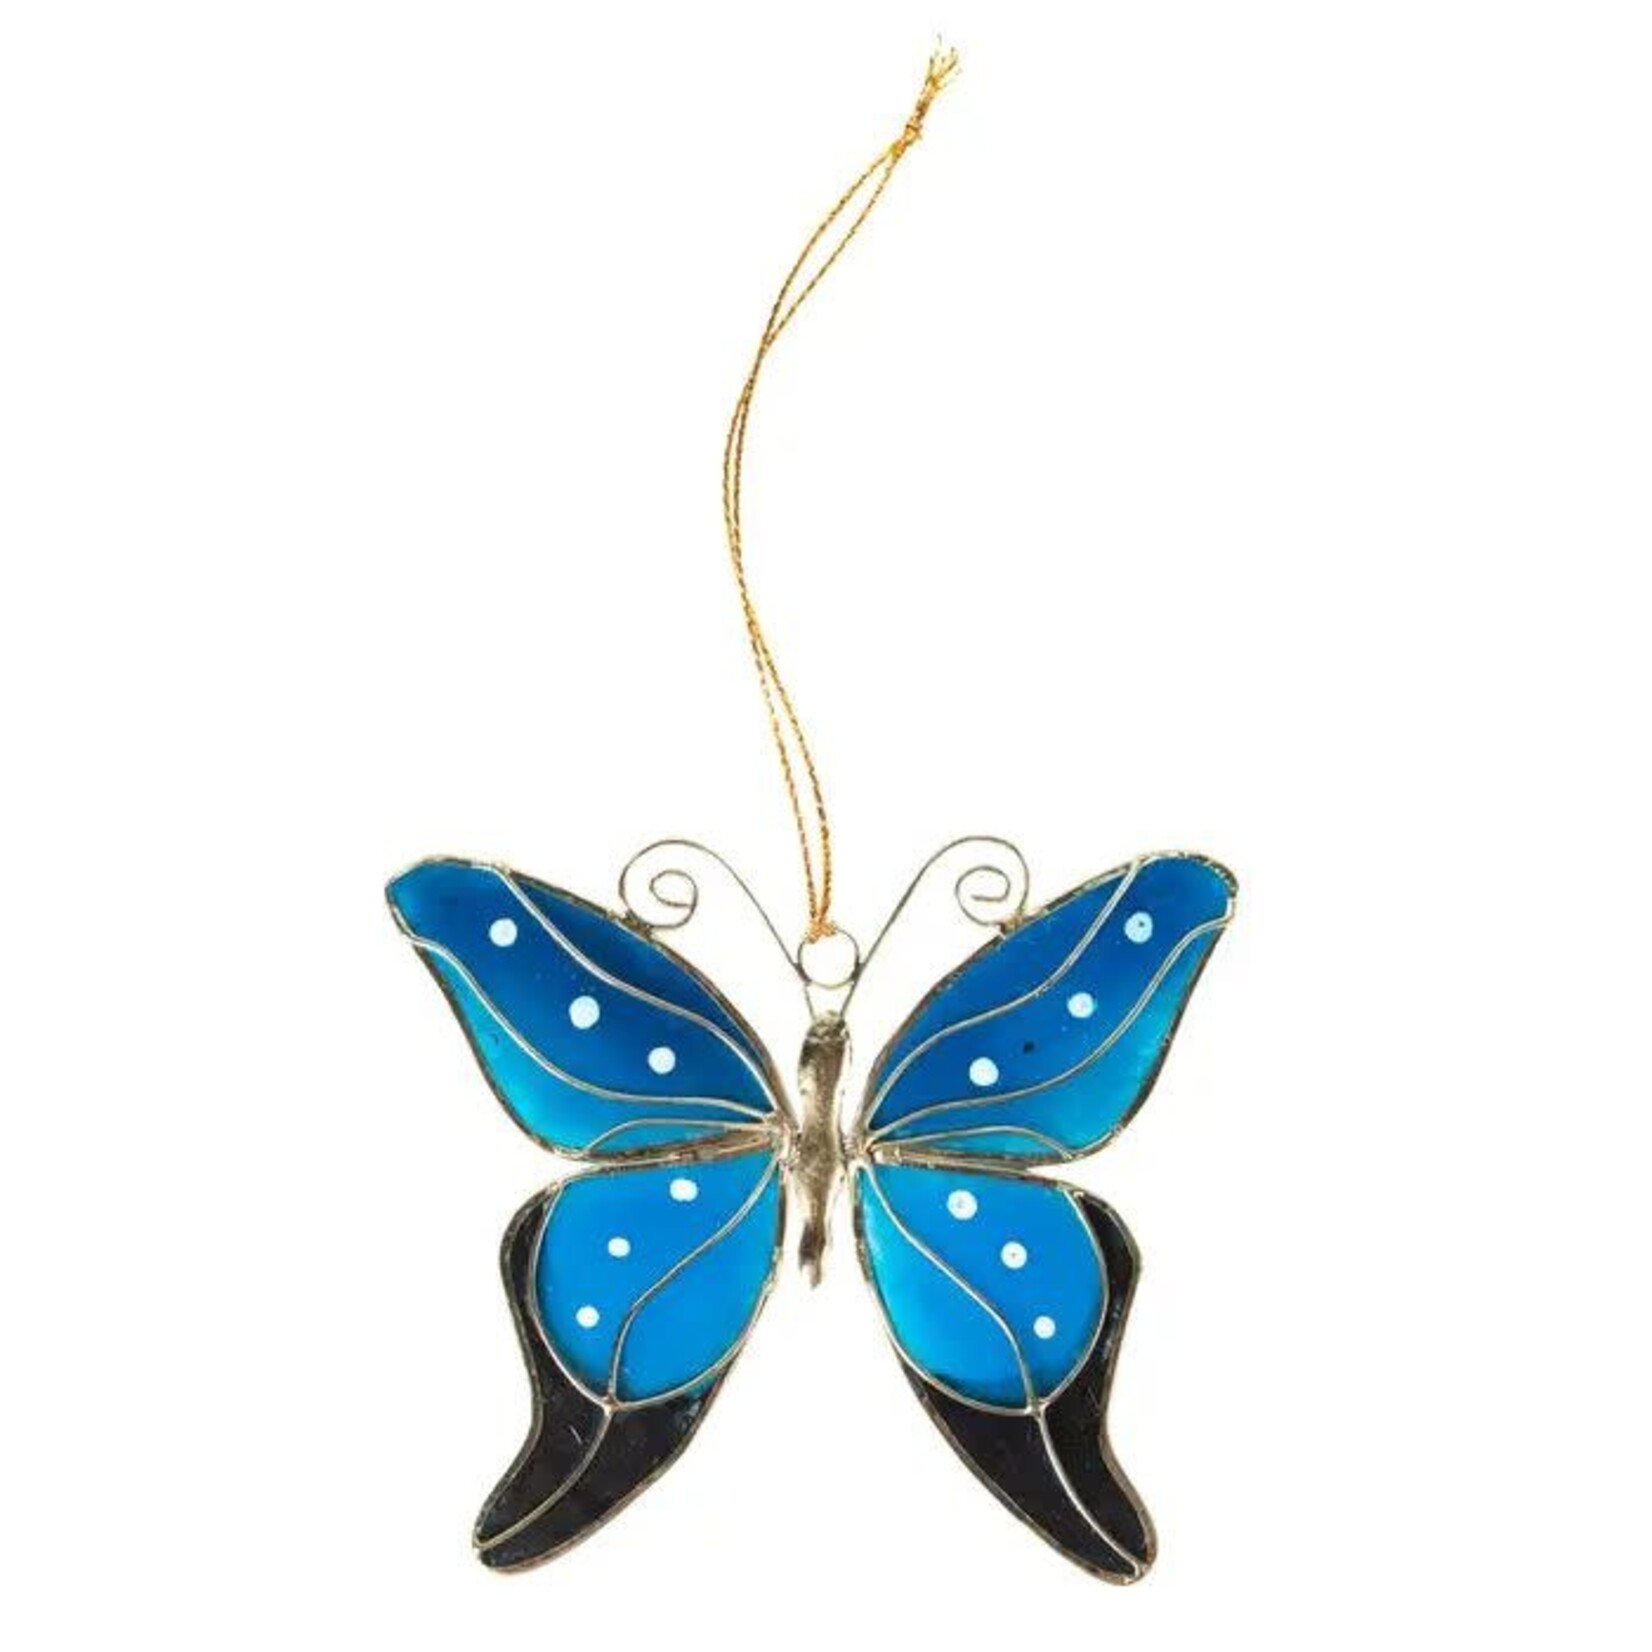 Philippines Ornament Butterfly Capiz 3.25Wx3H Blue/B